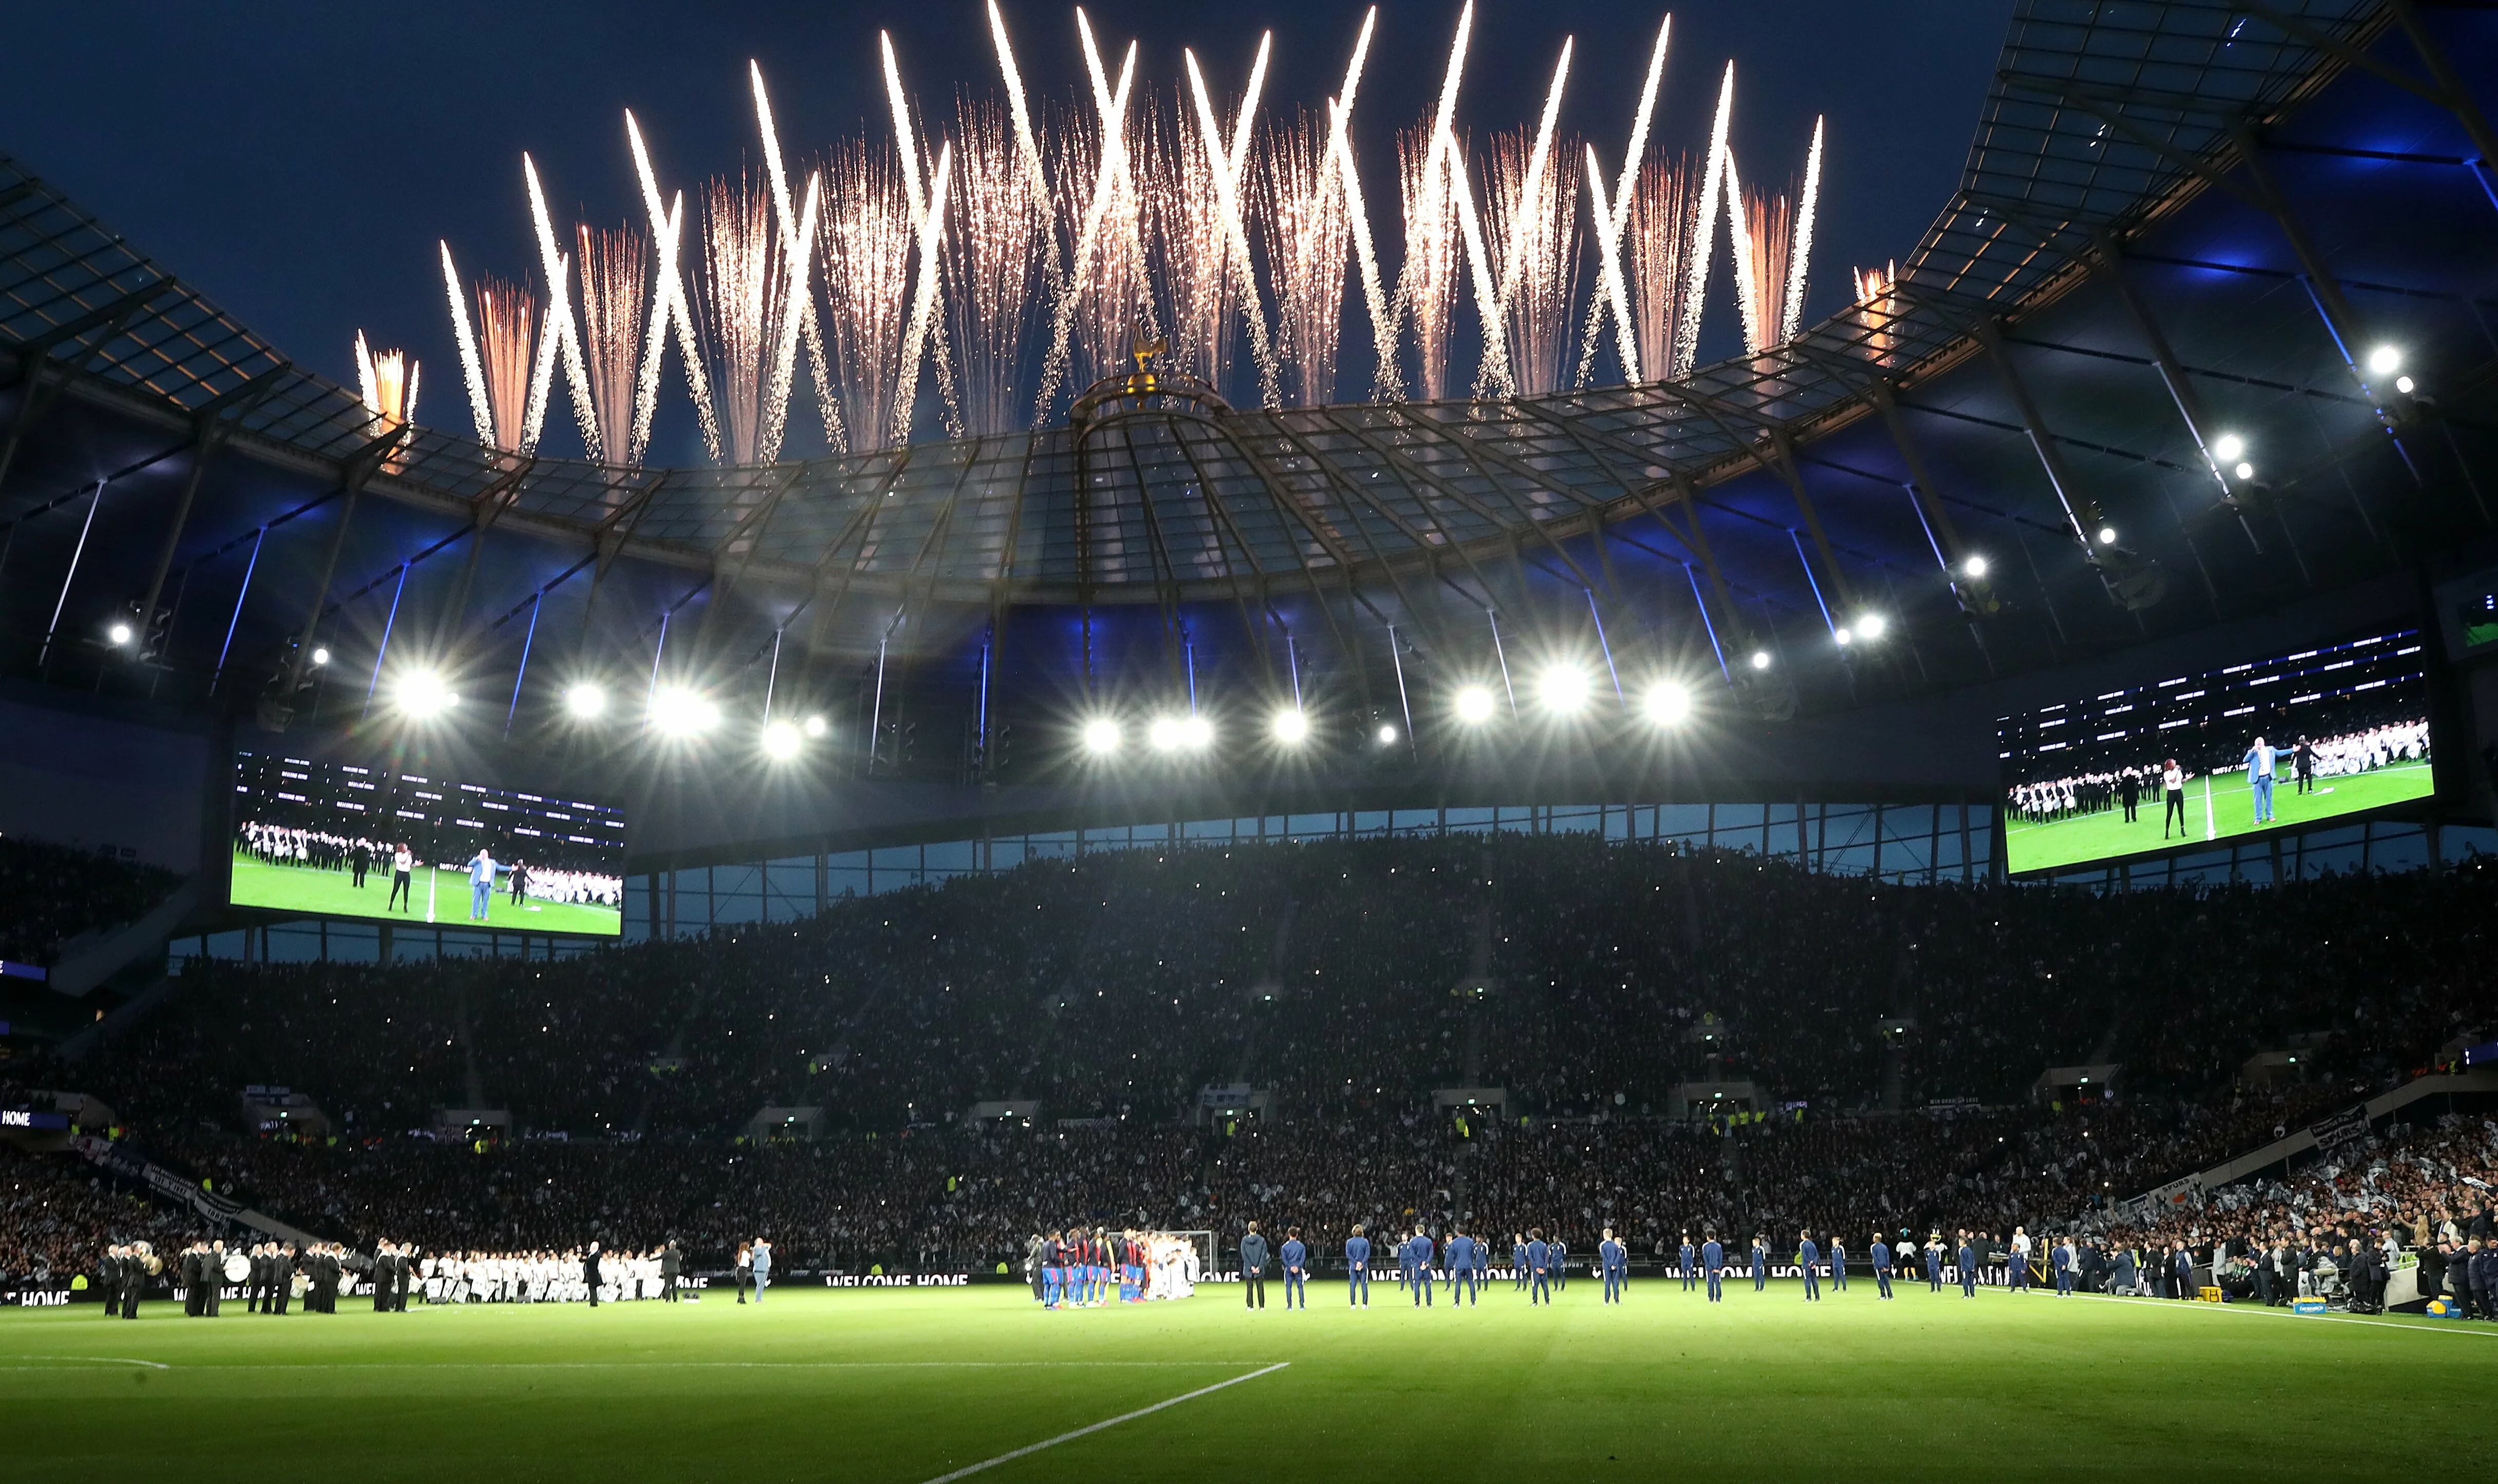 Eden Hazard Has Cheeky Dig At Spurs After Opening Of New Stadium  - FootyNews.co.uk